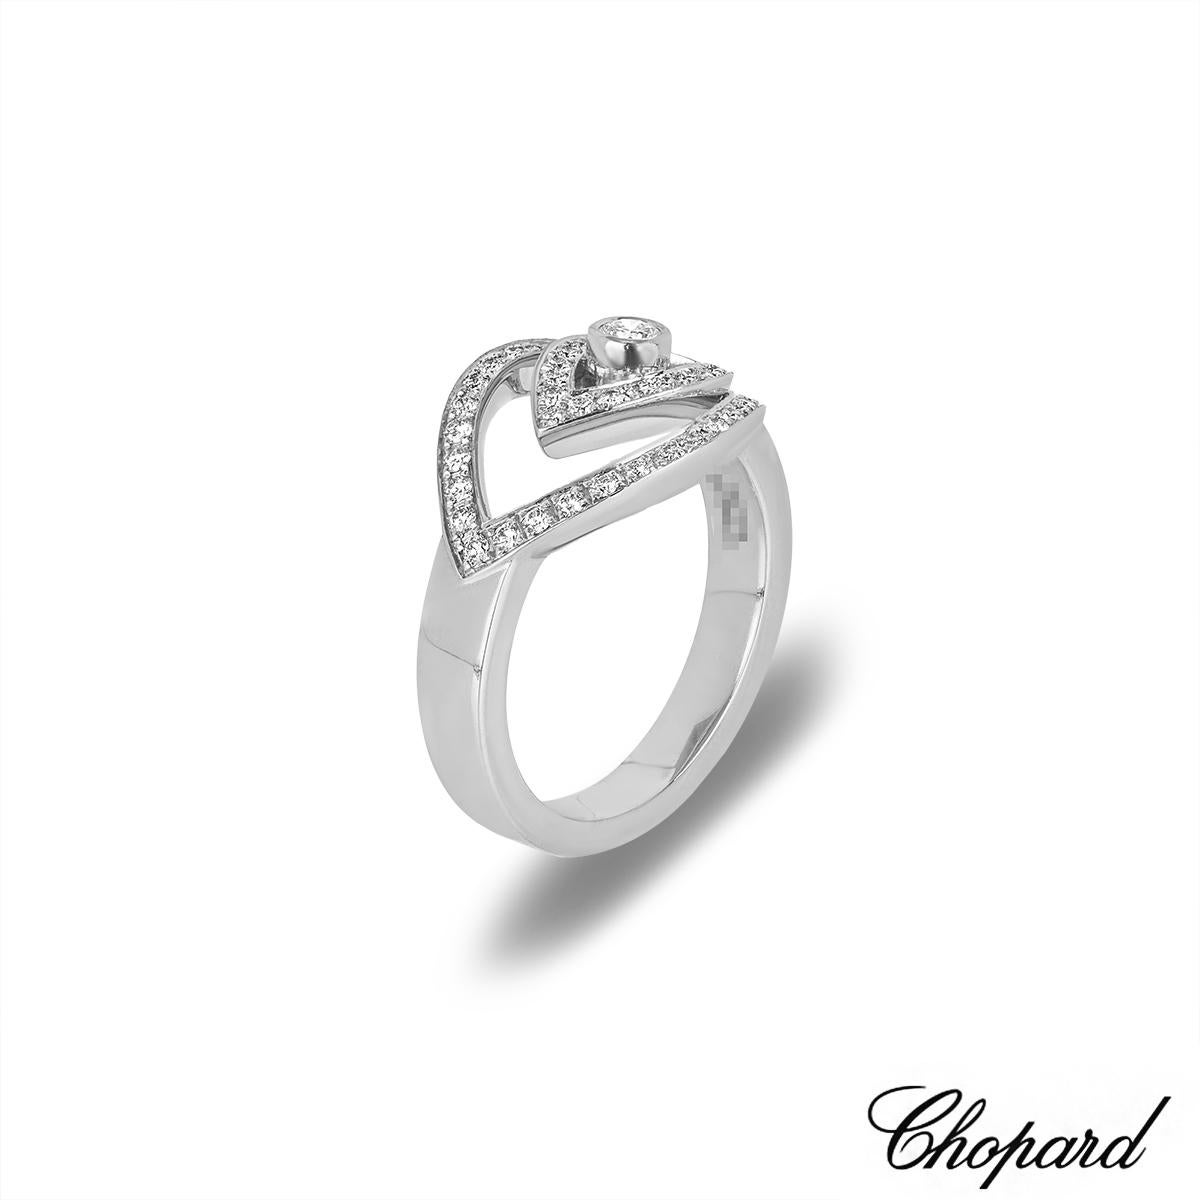 An enticing 18k white gold diamond ring by Chopard from the Happy Spirit collection. The ring features an eye motif set to the centre with a round brilliant cut diamond in a bezel setting, weighing approximately 0.07ct, G colour and VS clarity. The